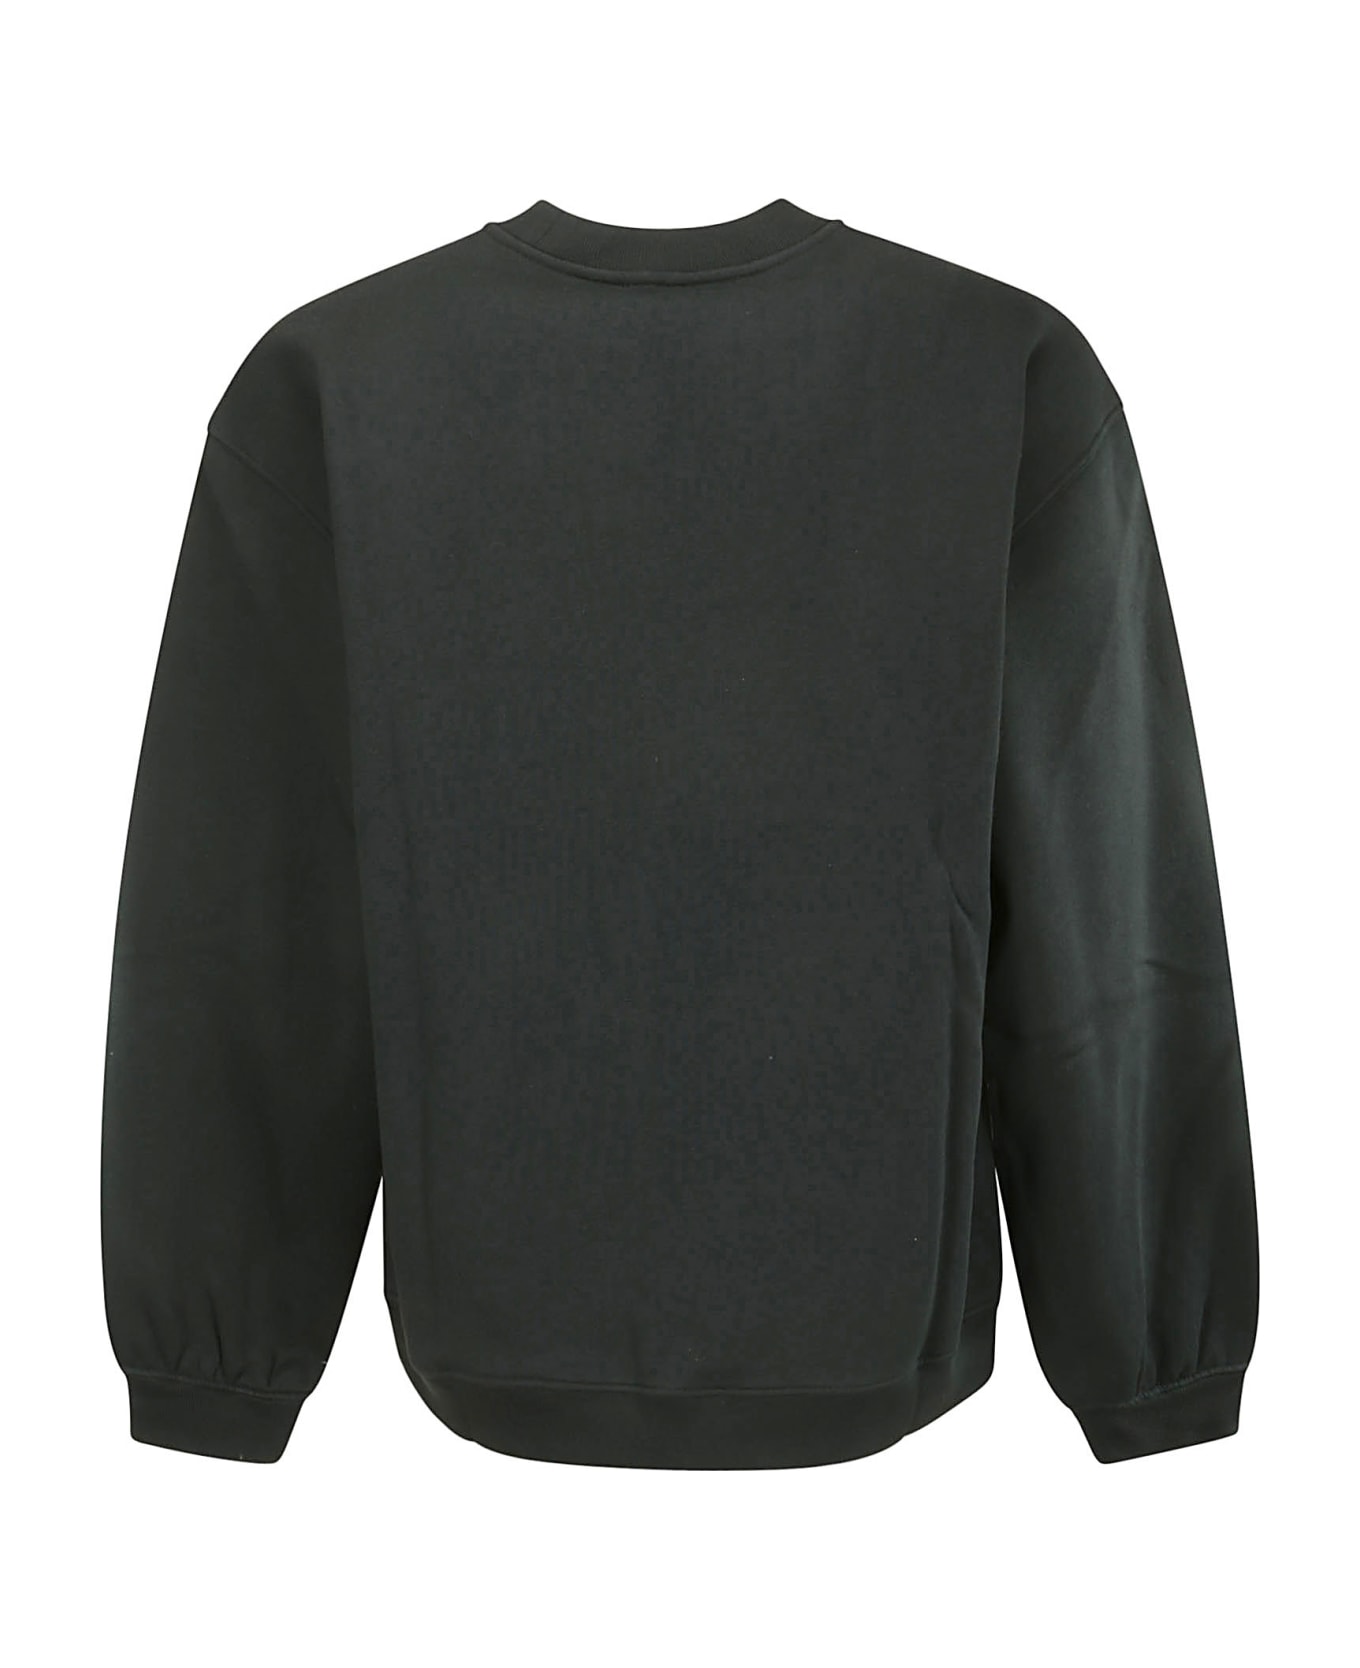 Y/Project Evergreen Pinched Logo Sweatshirt - Ensure they look the part this Eid with a smart range of boys shirts